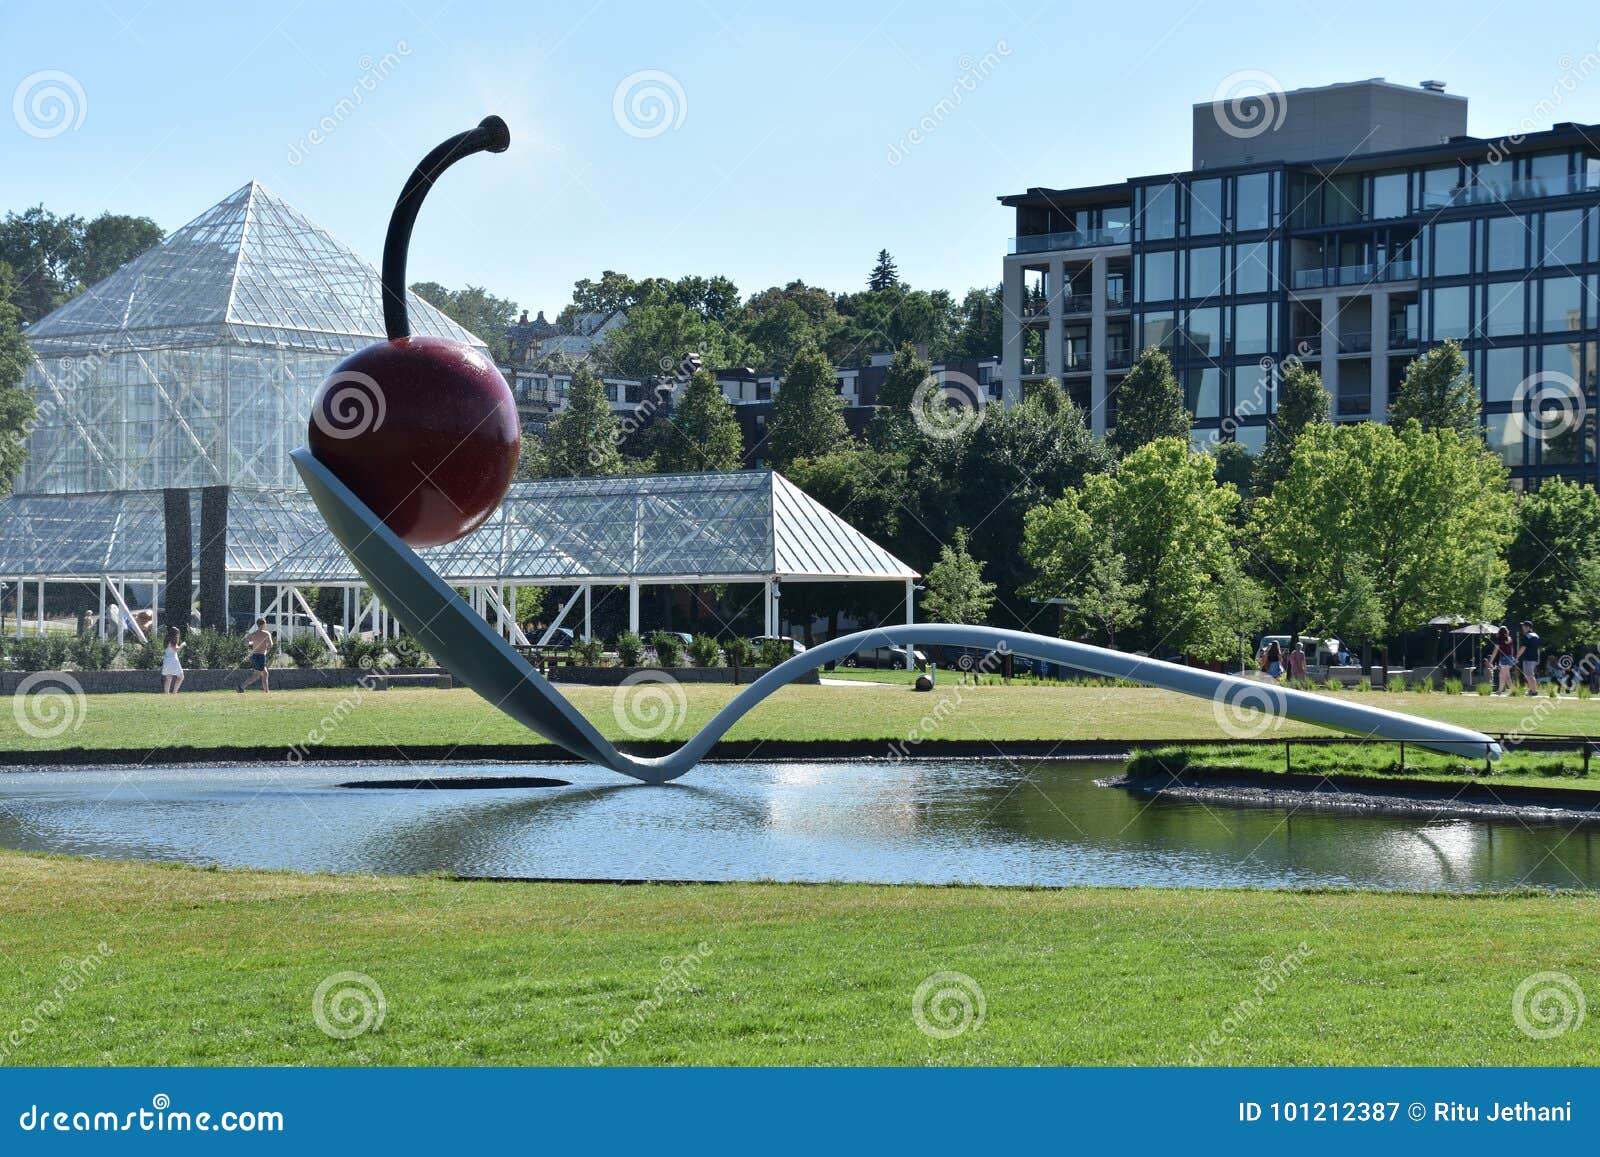 The Spoonbridge And Cherry At The Minneapolis Sculpture Garden In